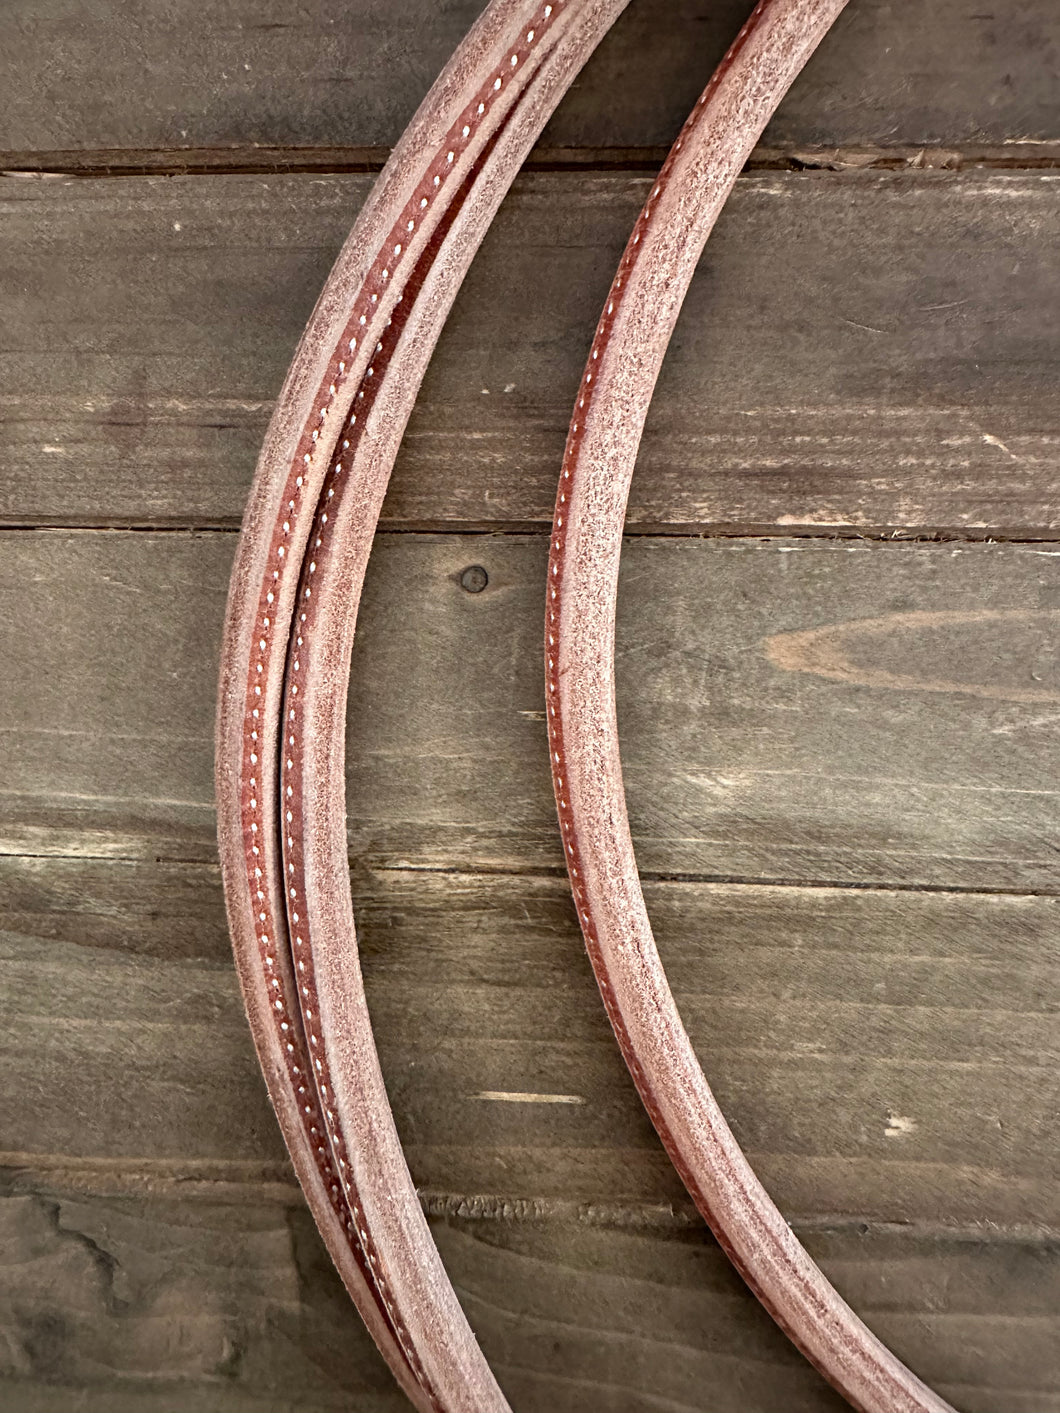 Quality Harness Leather Romal Reins New! OH-102”, 110”